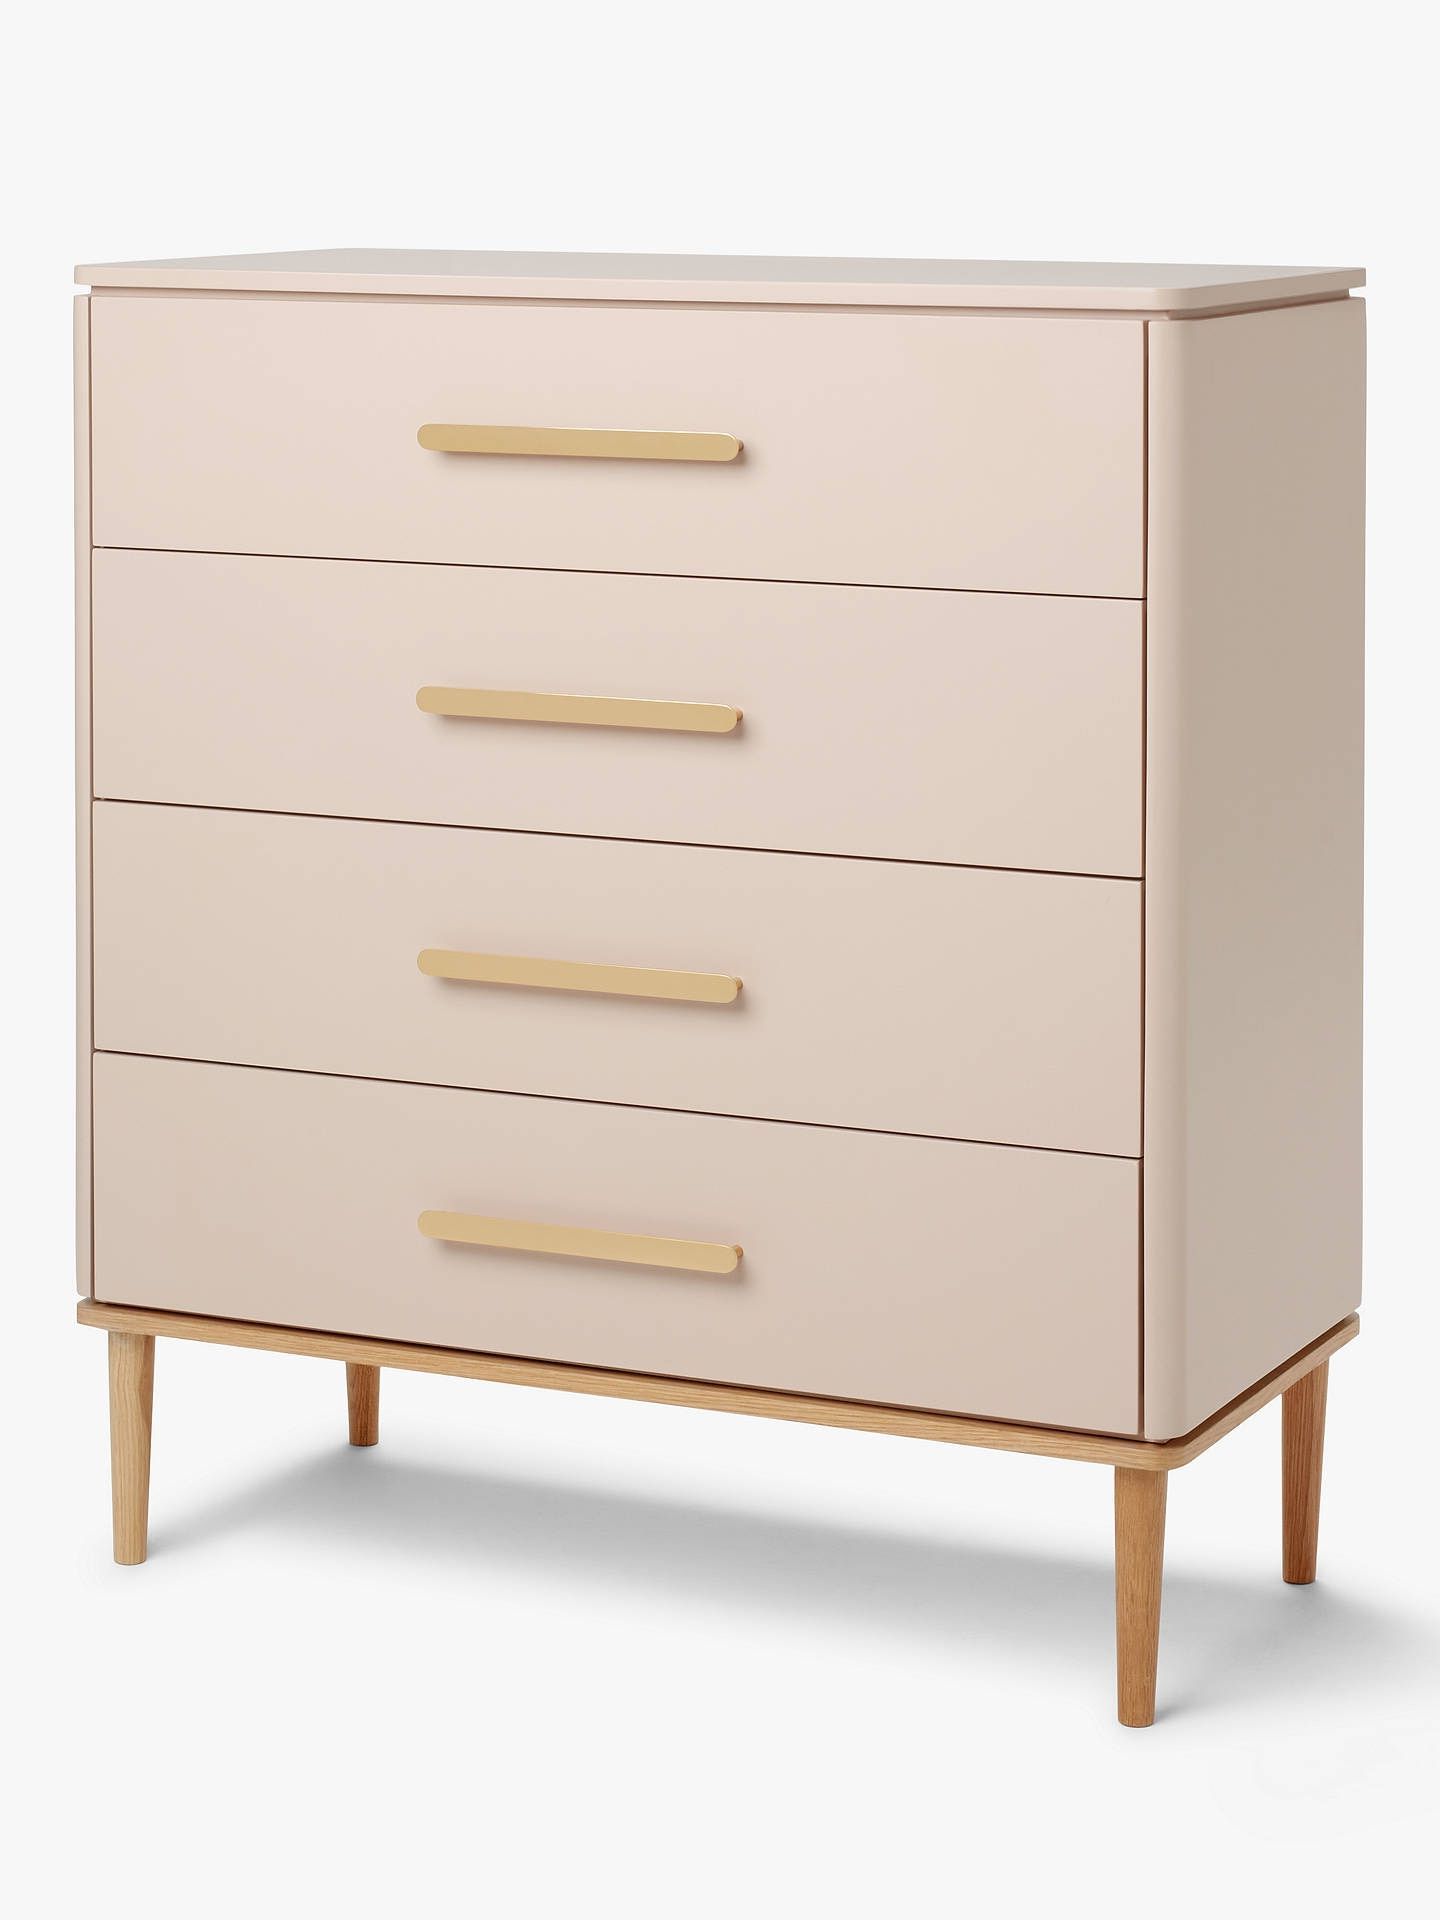 John Lewis & Partners Show Wood 4 Drawer Chest, Nougat (View 15 of 15)